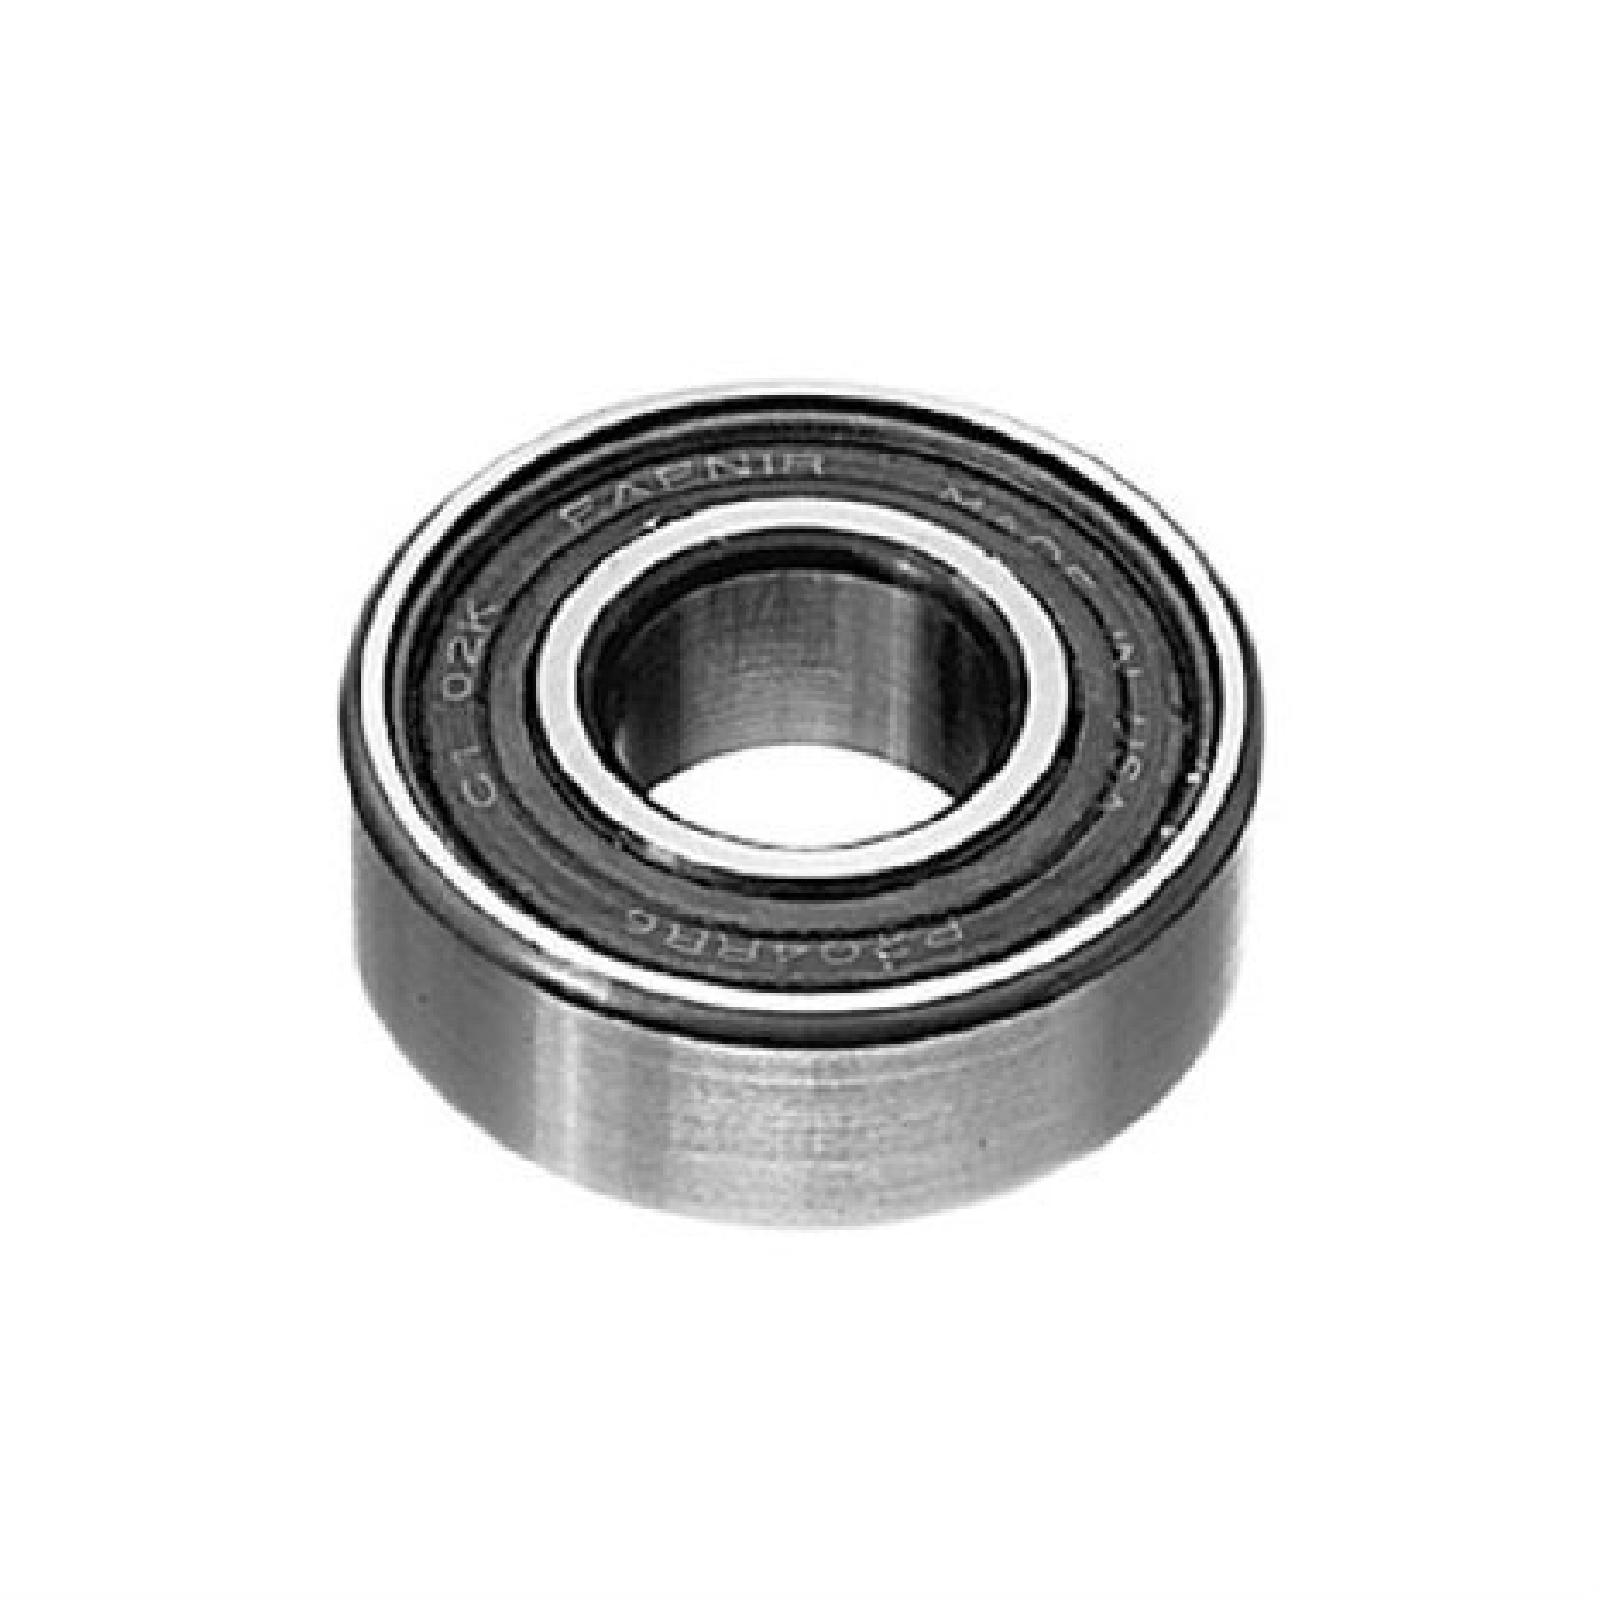 BEARING , BALL MAGNUM 99502 part# 45-260 by Oregon